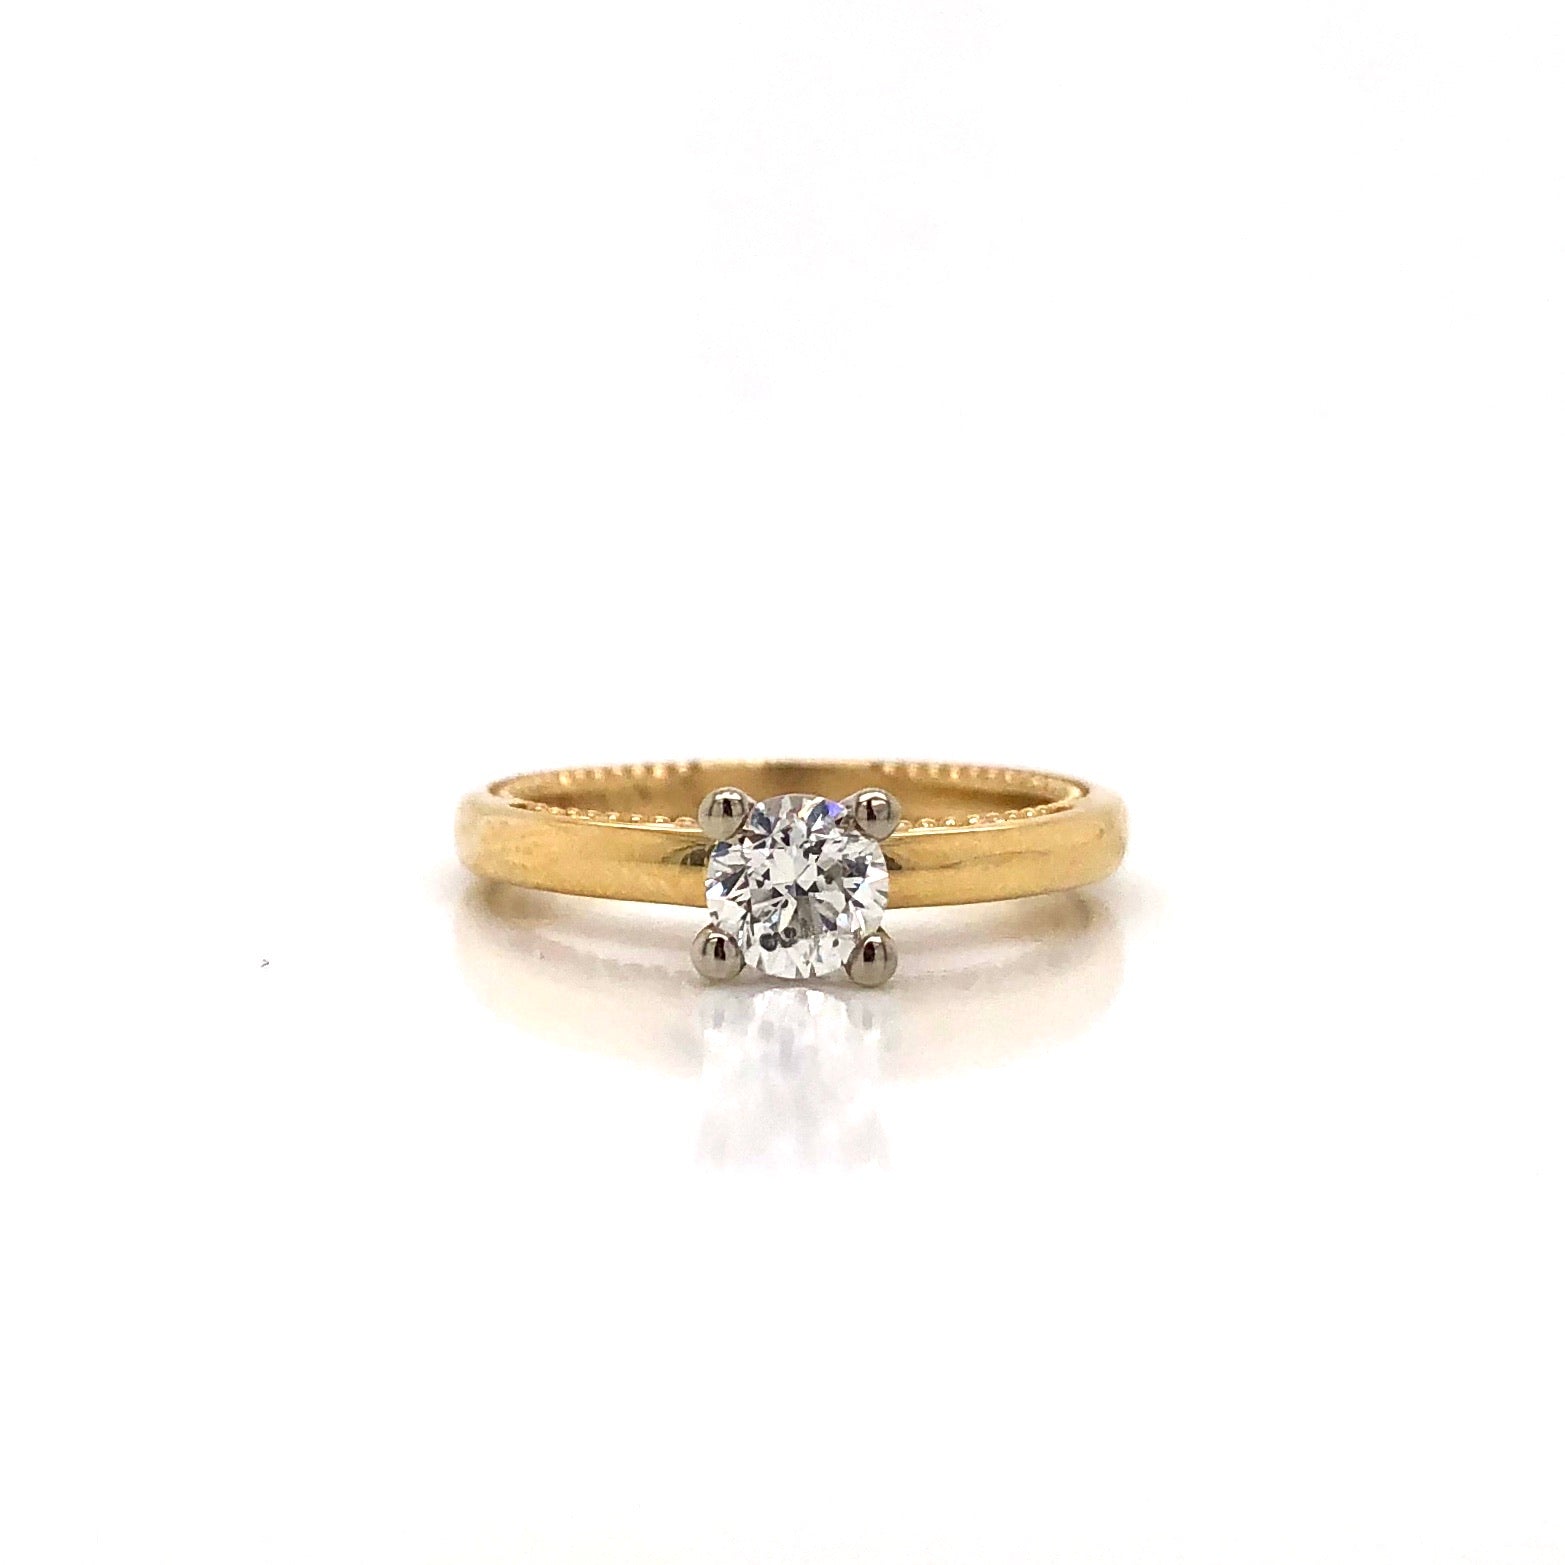 14K Yellow Gold Solitaire Diamond Engagement Ring With Filigree Detailing